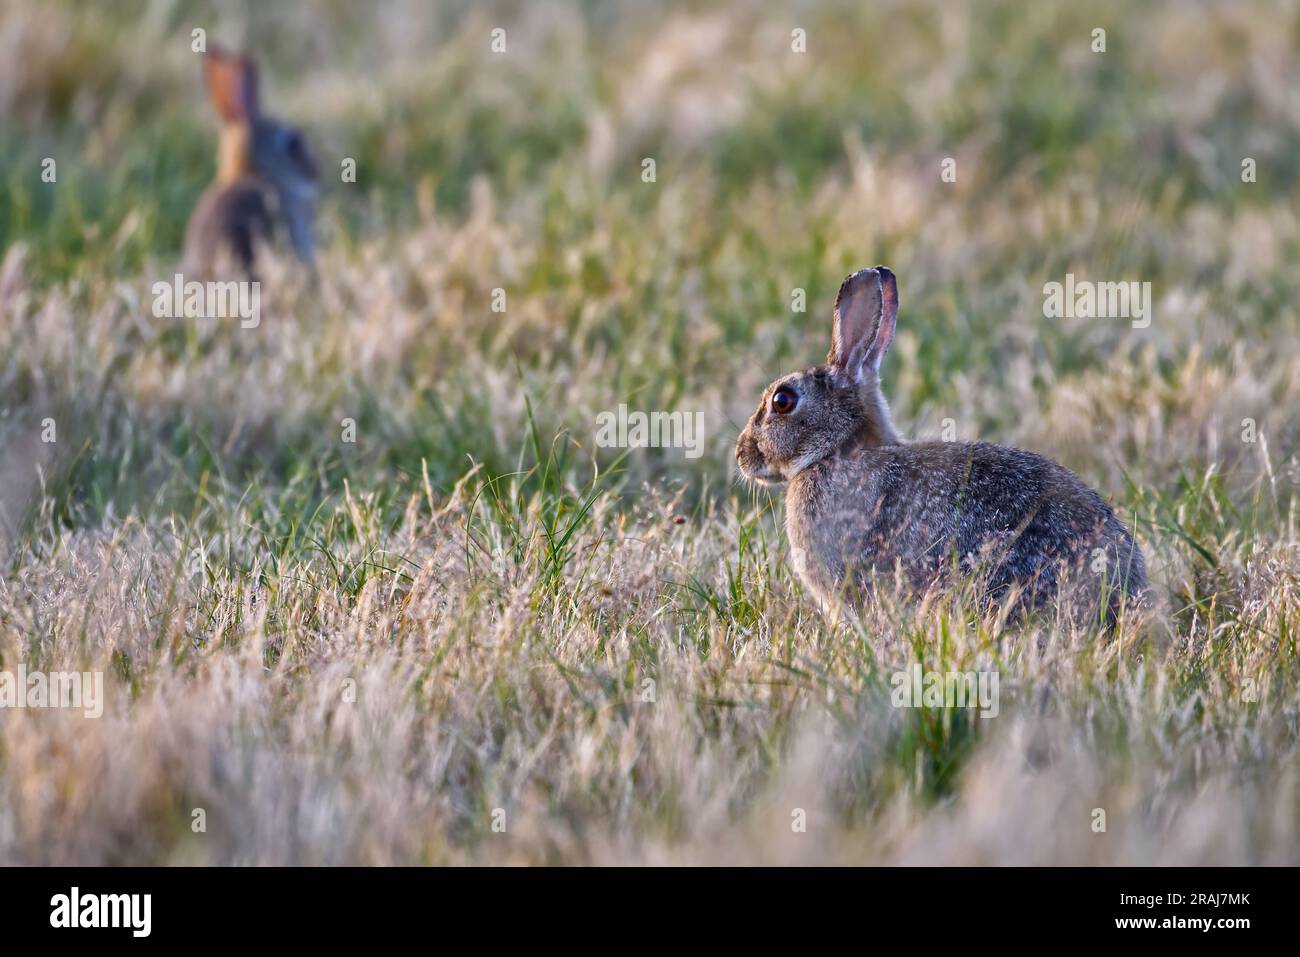 A pair of cute rabbits Stock Photo